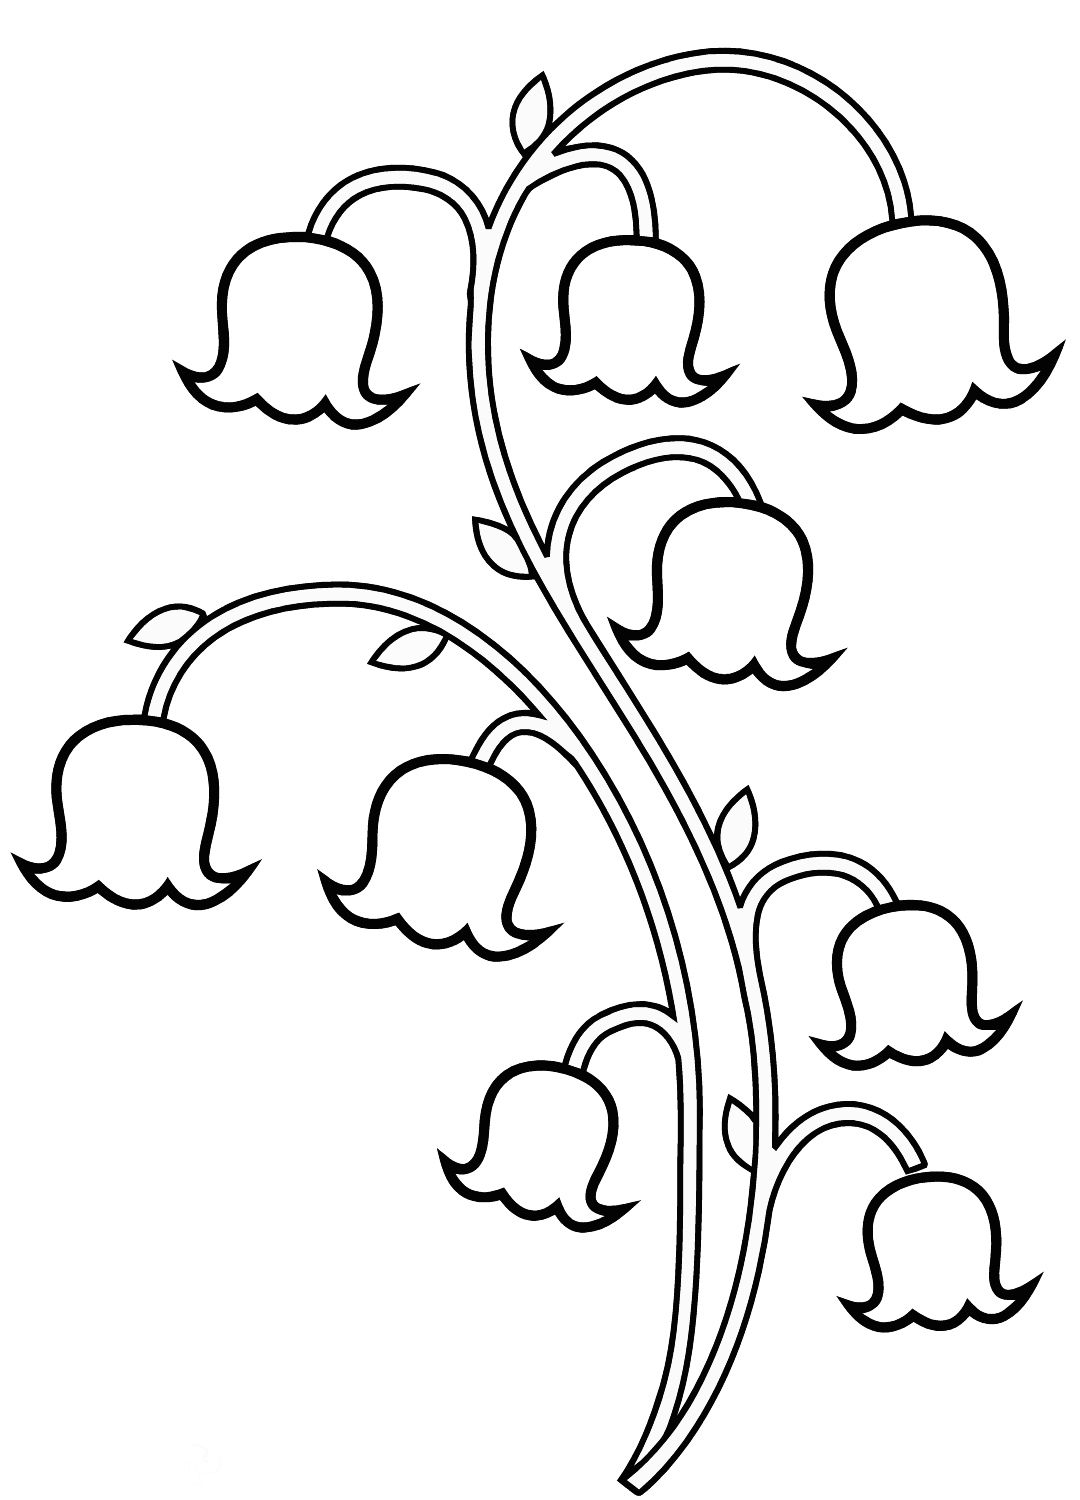 Lily Of The Valley Coloring Page Free Lily Of The Valley Clipart Coloring Page Download Free Clip